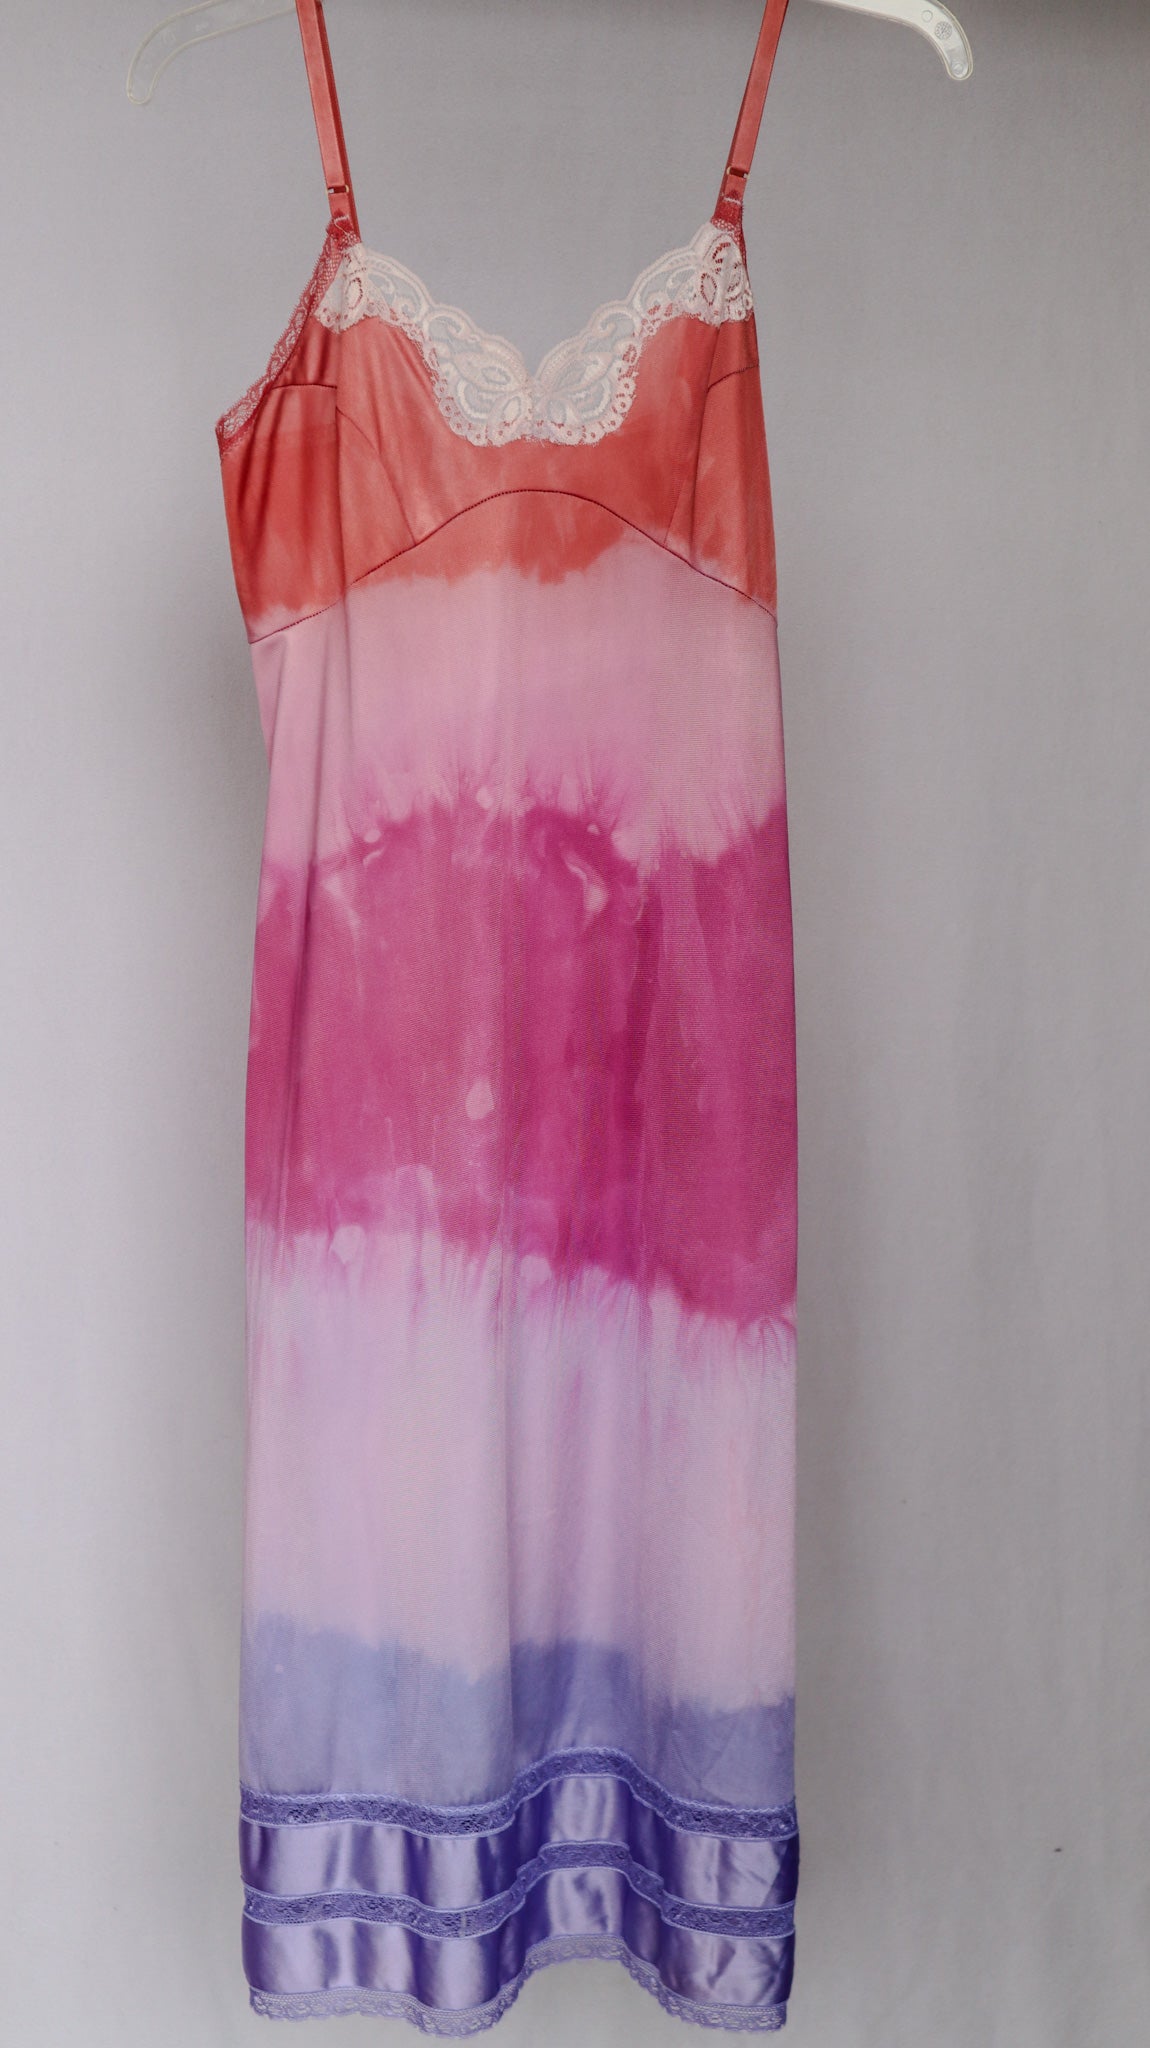 1 OF 1 CUSTOM DYED OMBRE DRESS